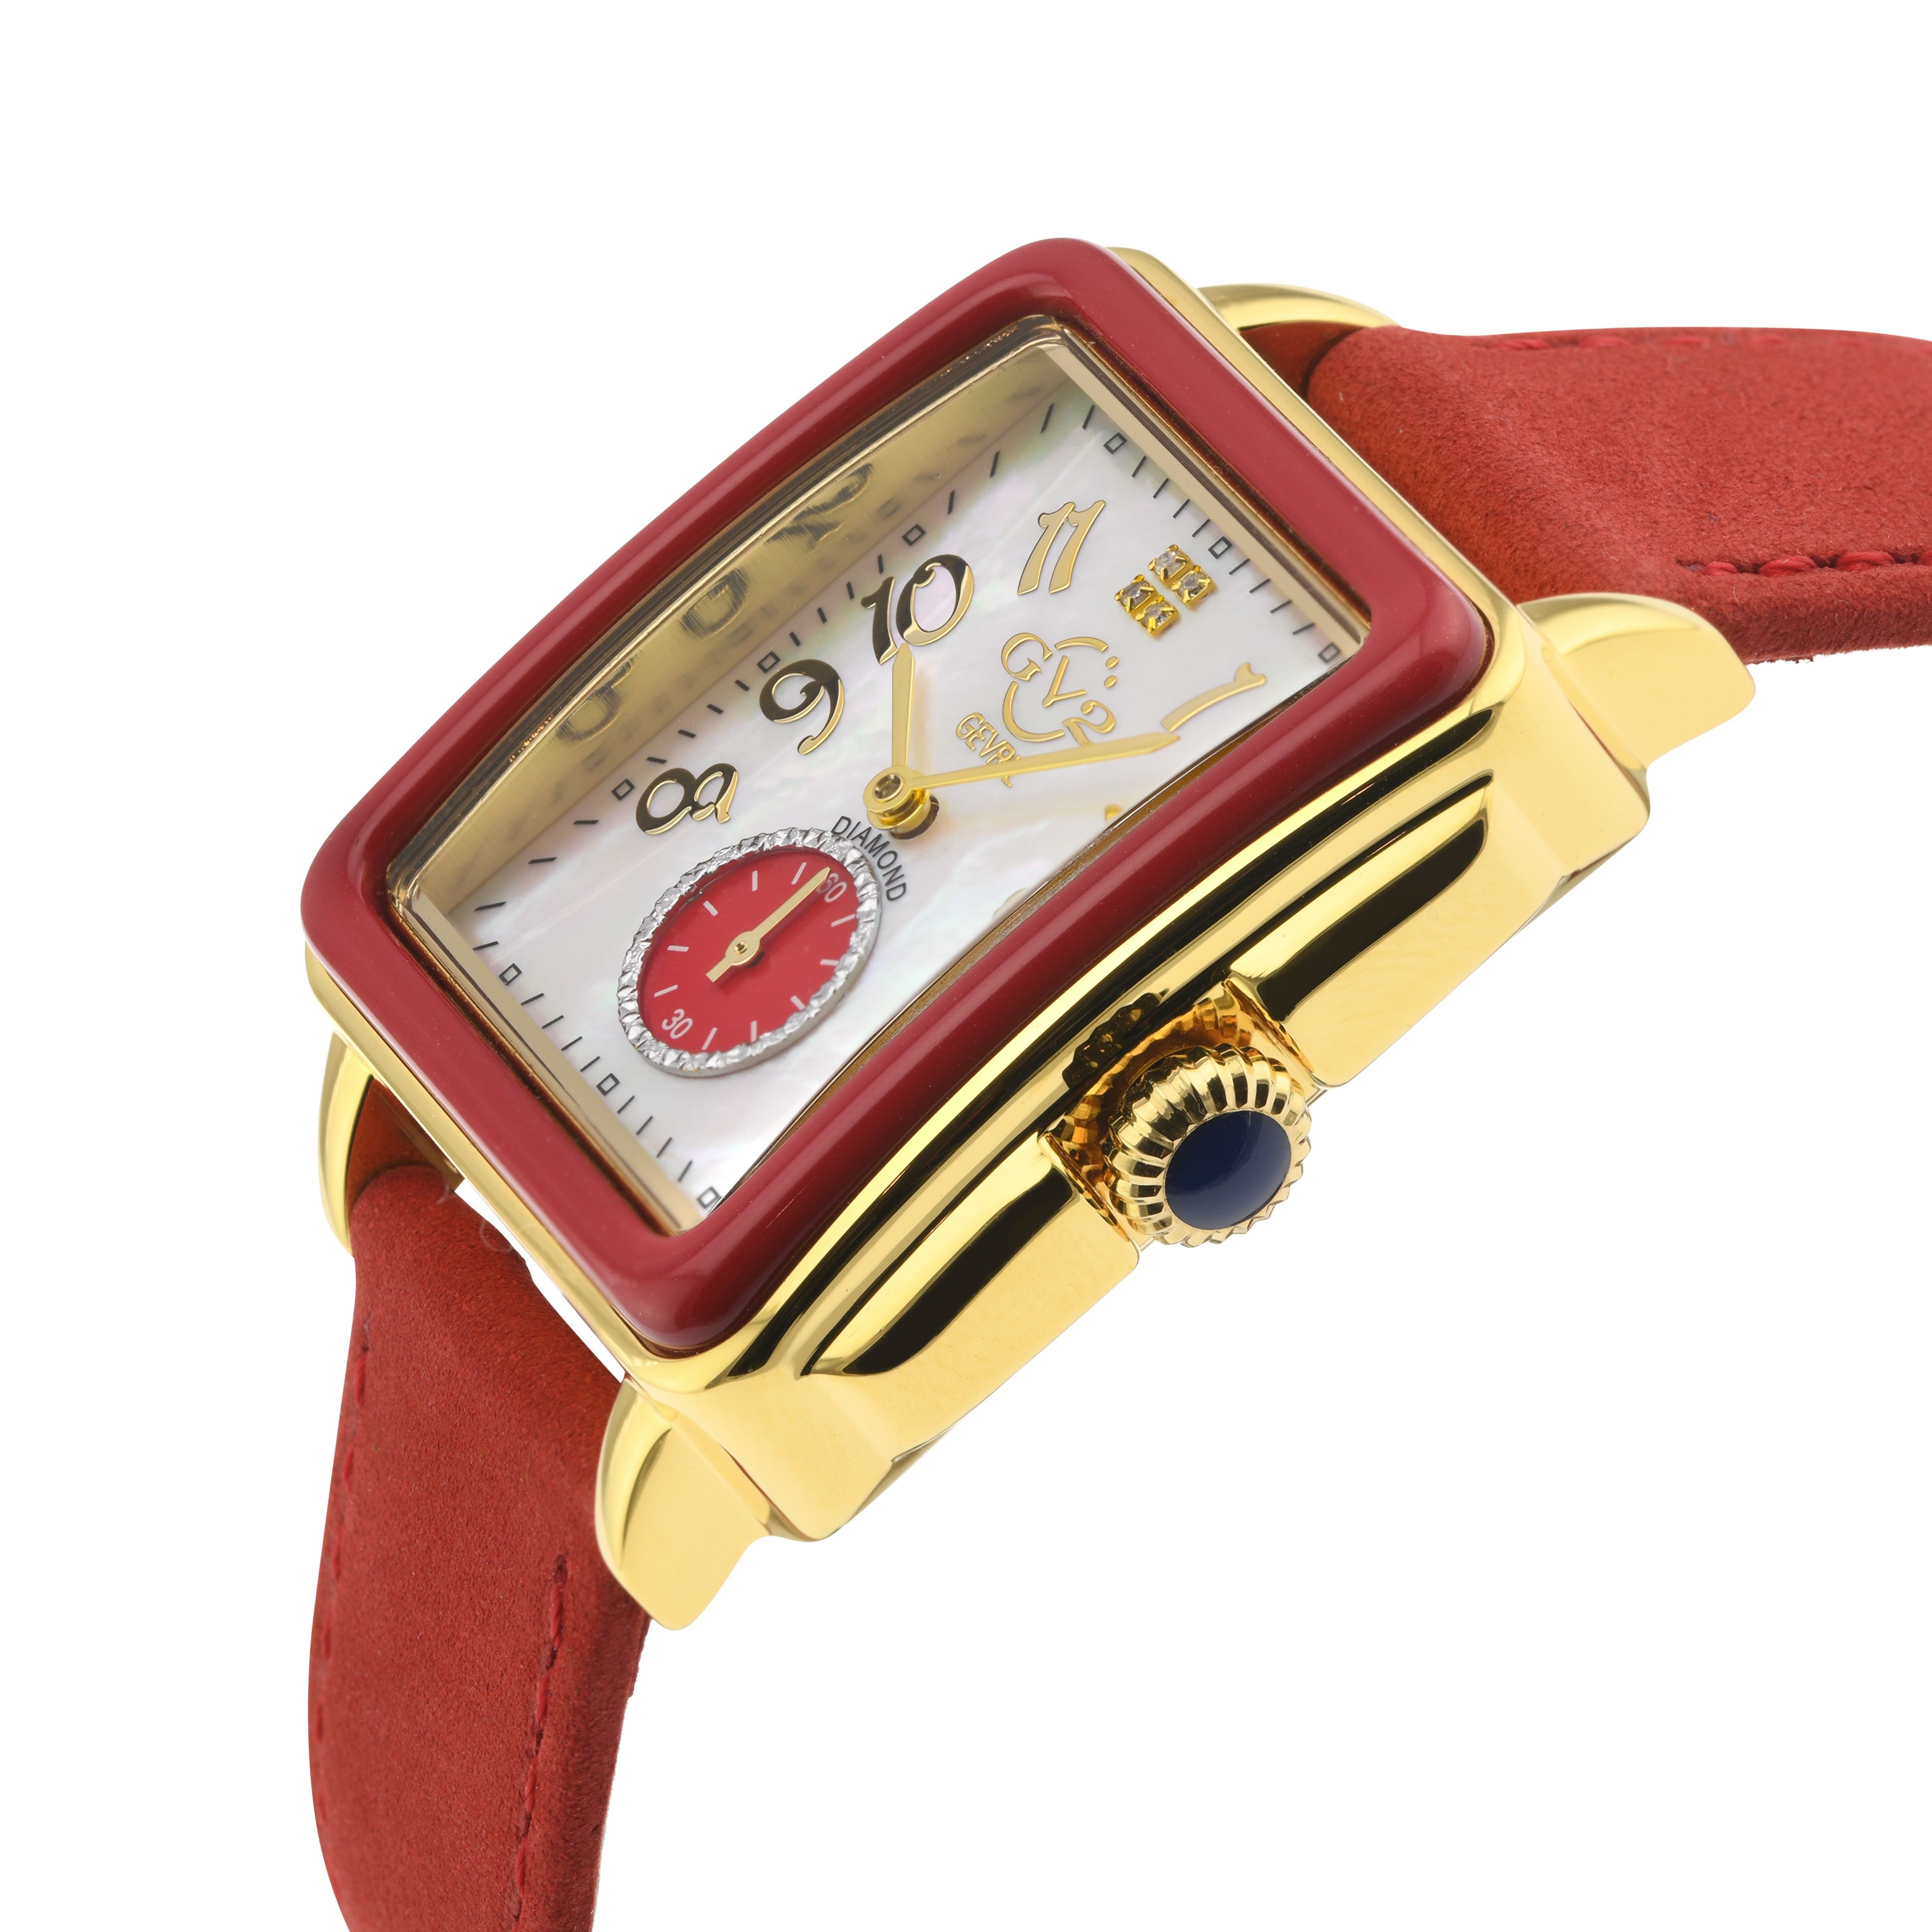 GV2 9261 Bari Enamel Swiss Quartz Diamond Watch
GV2 Women's Swiss Watch from the Bari Collection
37 mm Square 316L Stainless Steel IPYG Case, Red Enamel Bezel
White MOP Dial, 4 Diamonds at 12:00, Red Diamond Cut ring at 6:00
Push Pull Fluted crown with Blue cabochon Stone
Genuine Italian Red Suede Leather Strap with Tang Buckle
Anti-reflective Sapphire Crystal
Water Resistant to 50 Meters/5ATM
Swiss Quartz Movement Ronda 1069